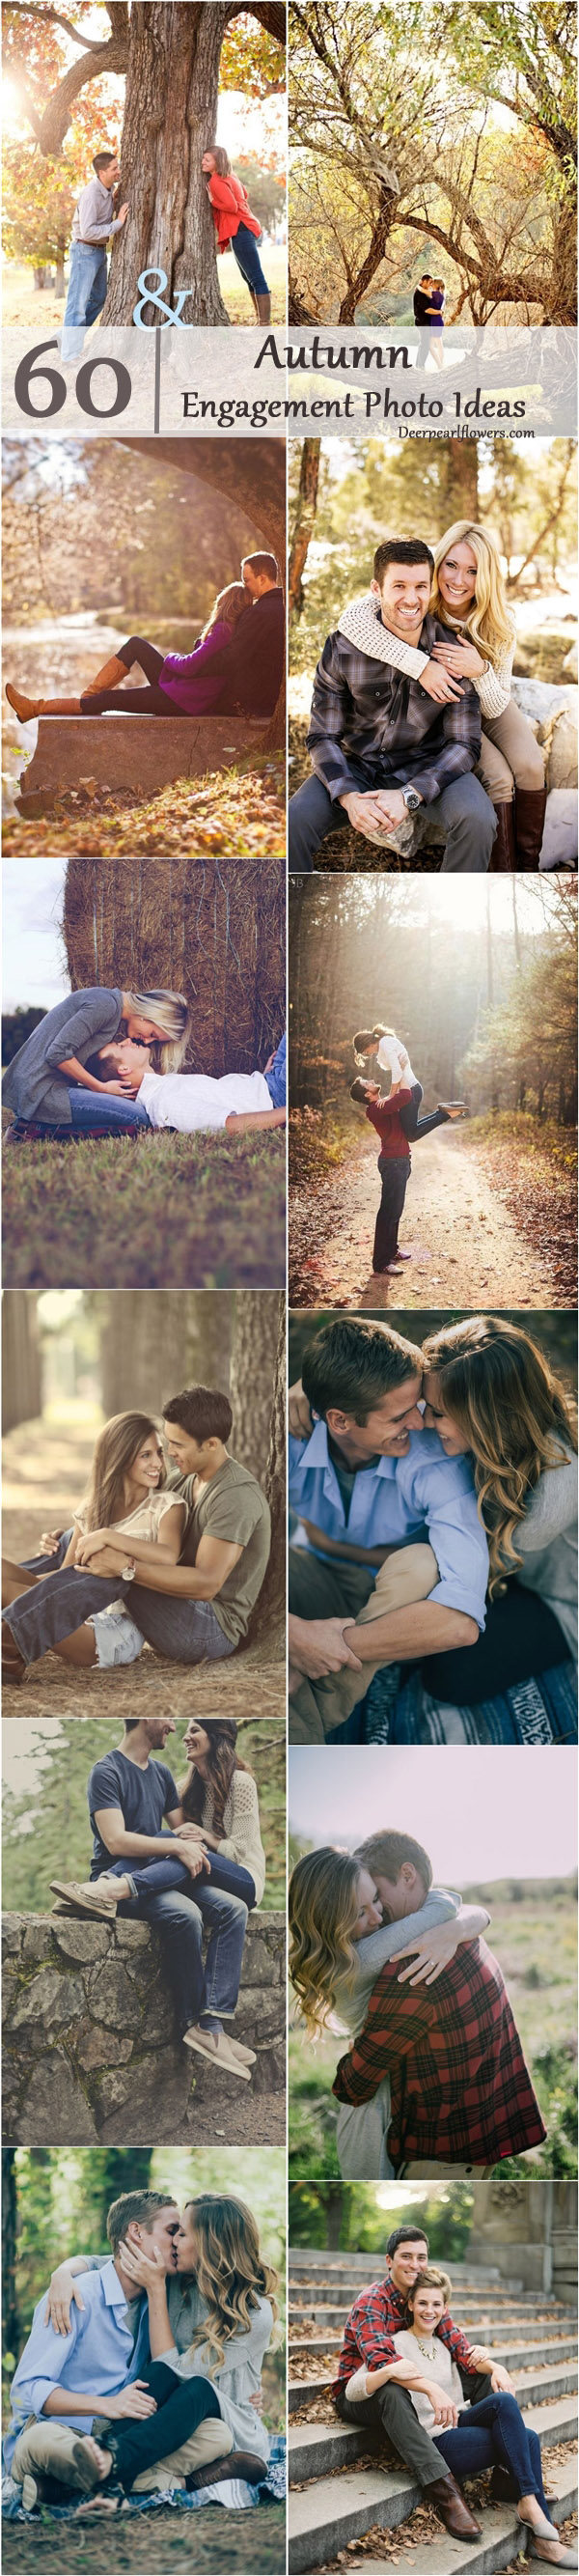 Fall Engagement Photo Shoot and Poses Ideas